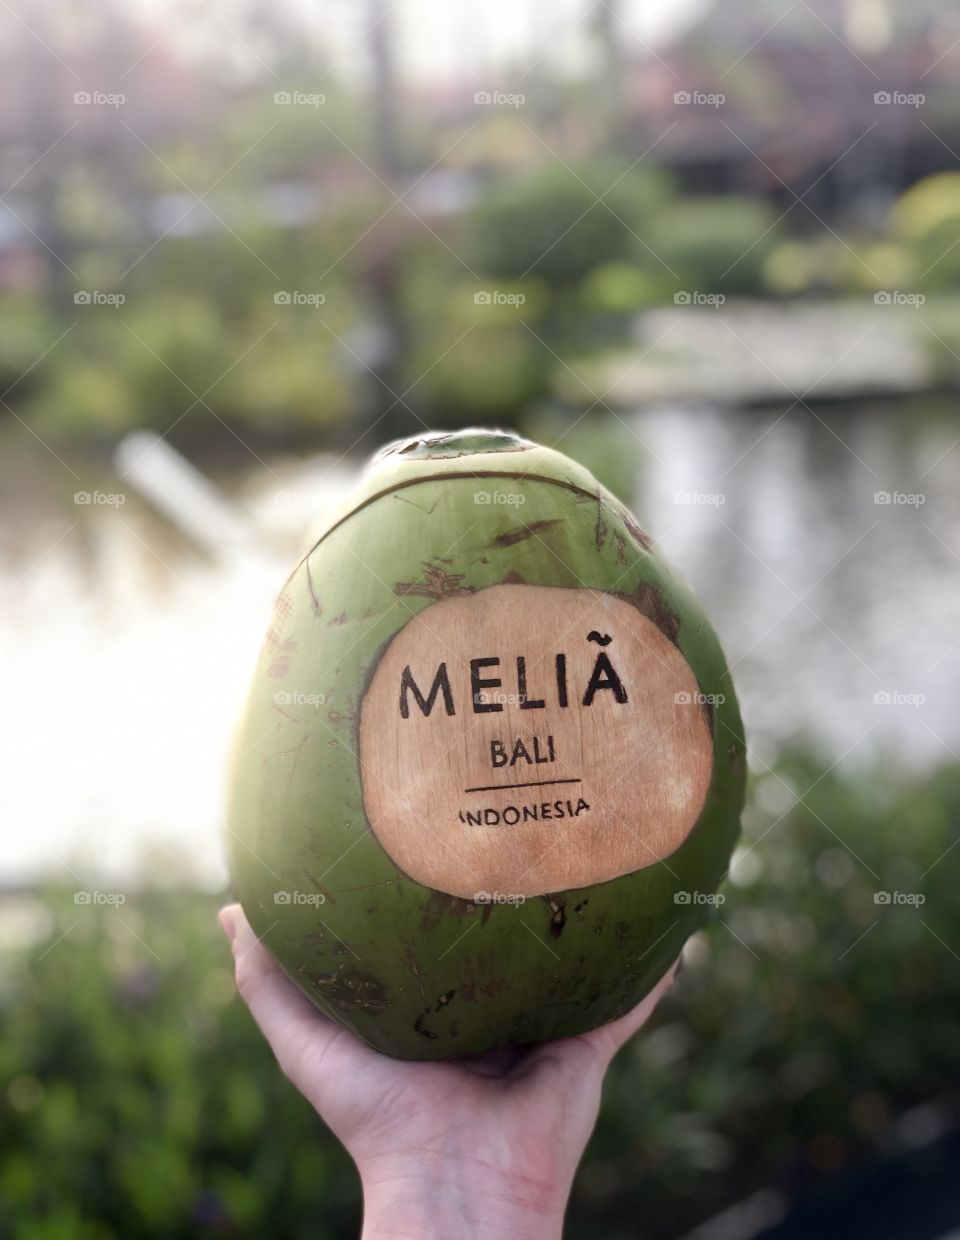 The Melia Bali, located in Nusa Dua, Bali, Indonesia, offers delicious drinks inside of a coconut. 